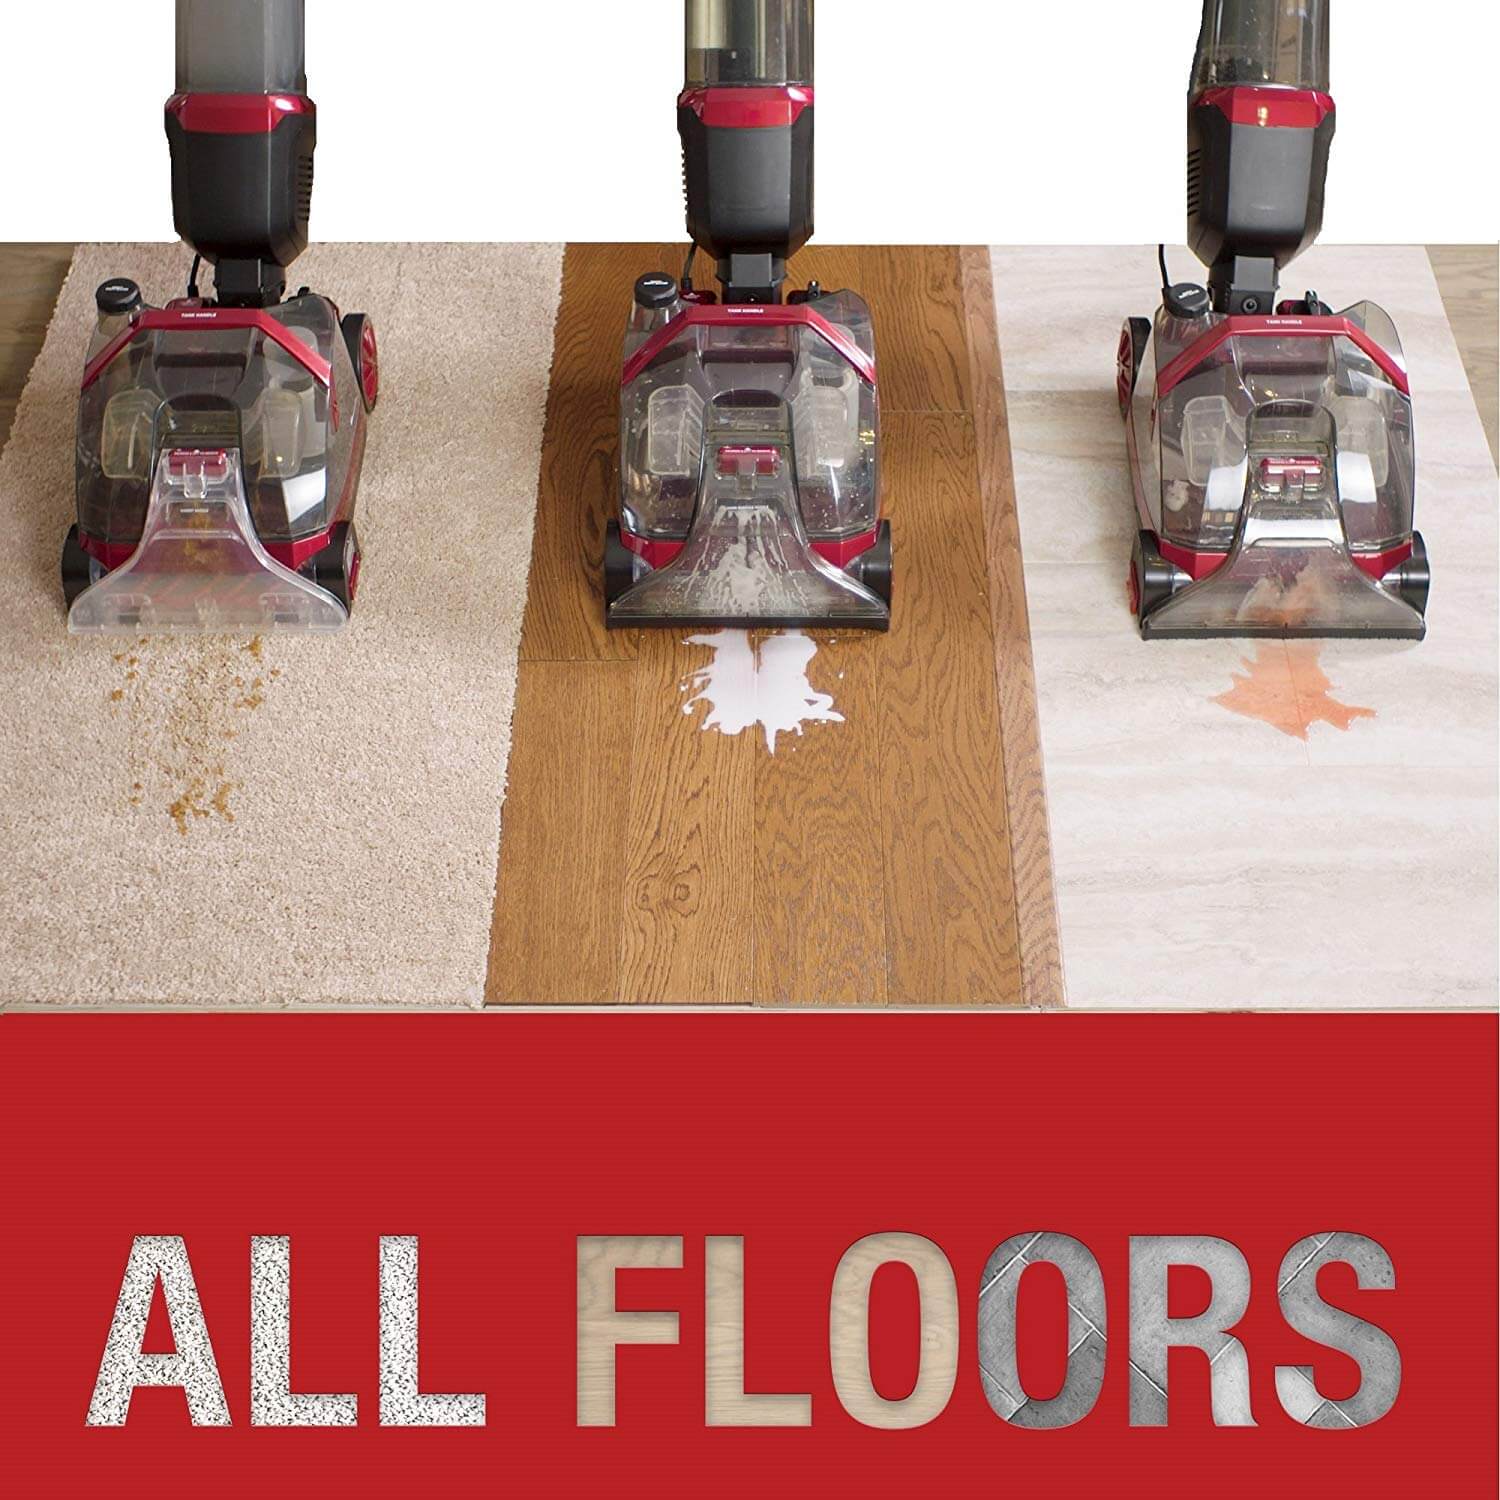 Flexclean All In One Floor Cleaner, Hardwood And Tile Floor Cleaning Machines